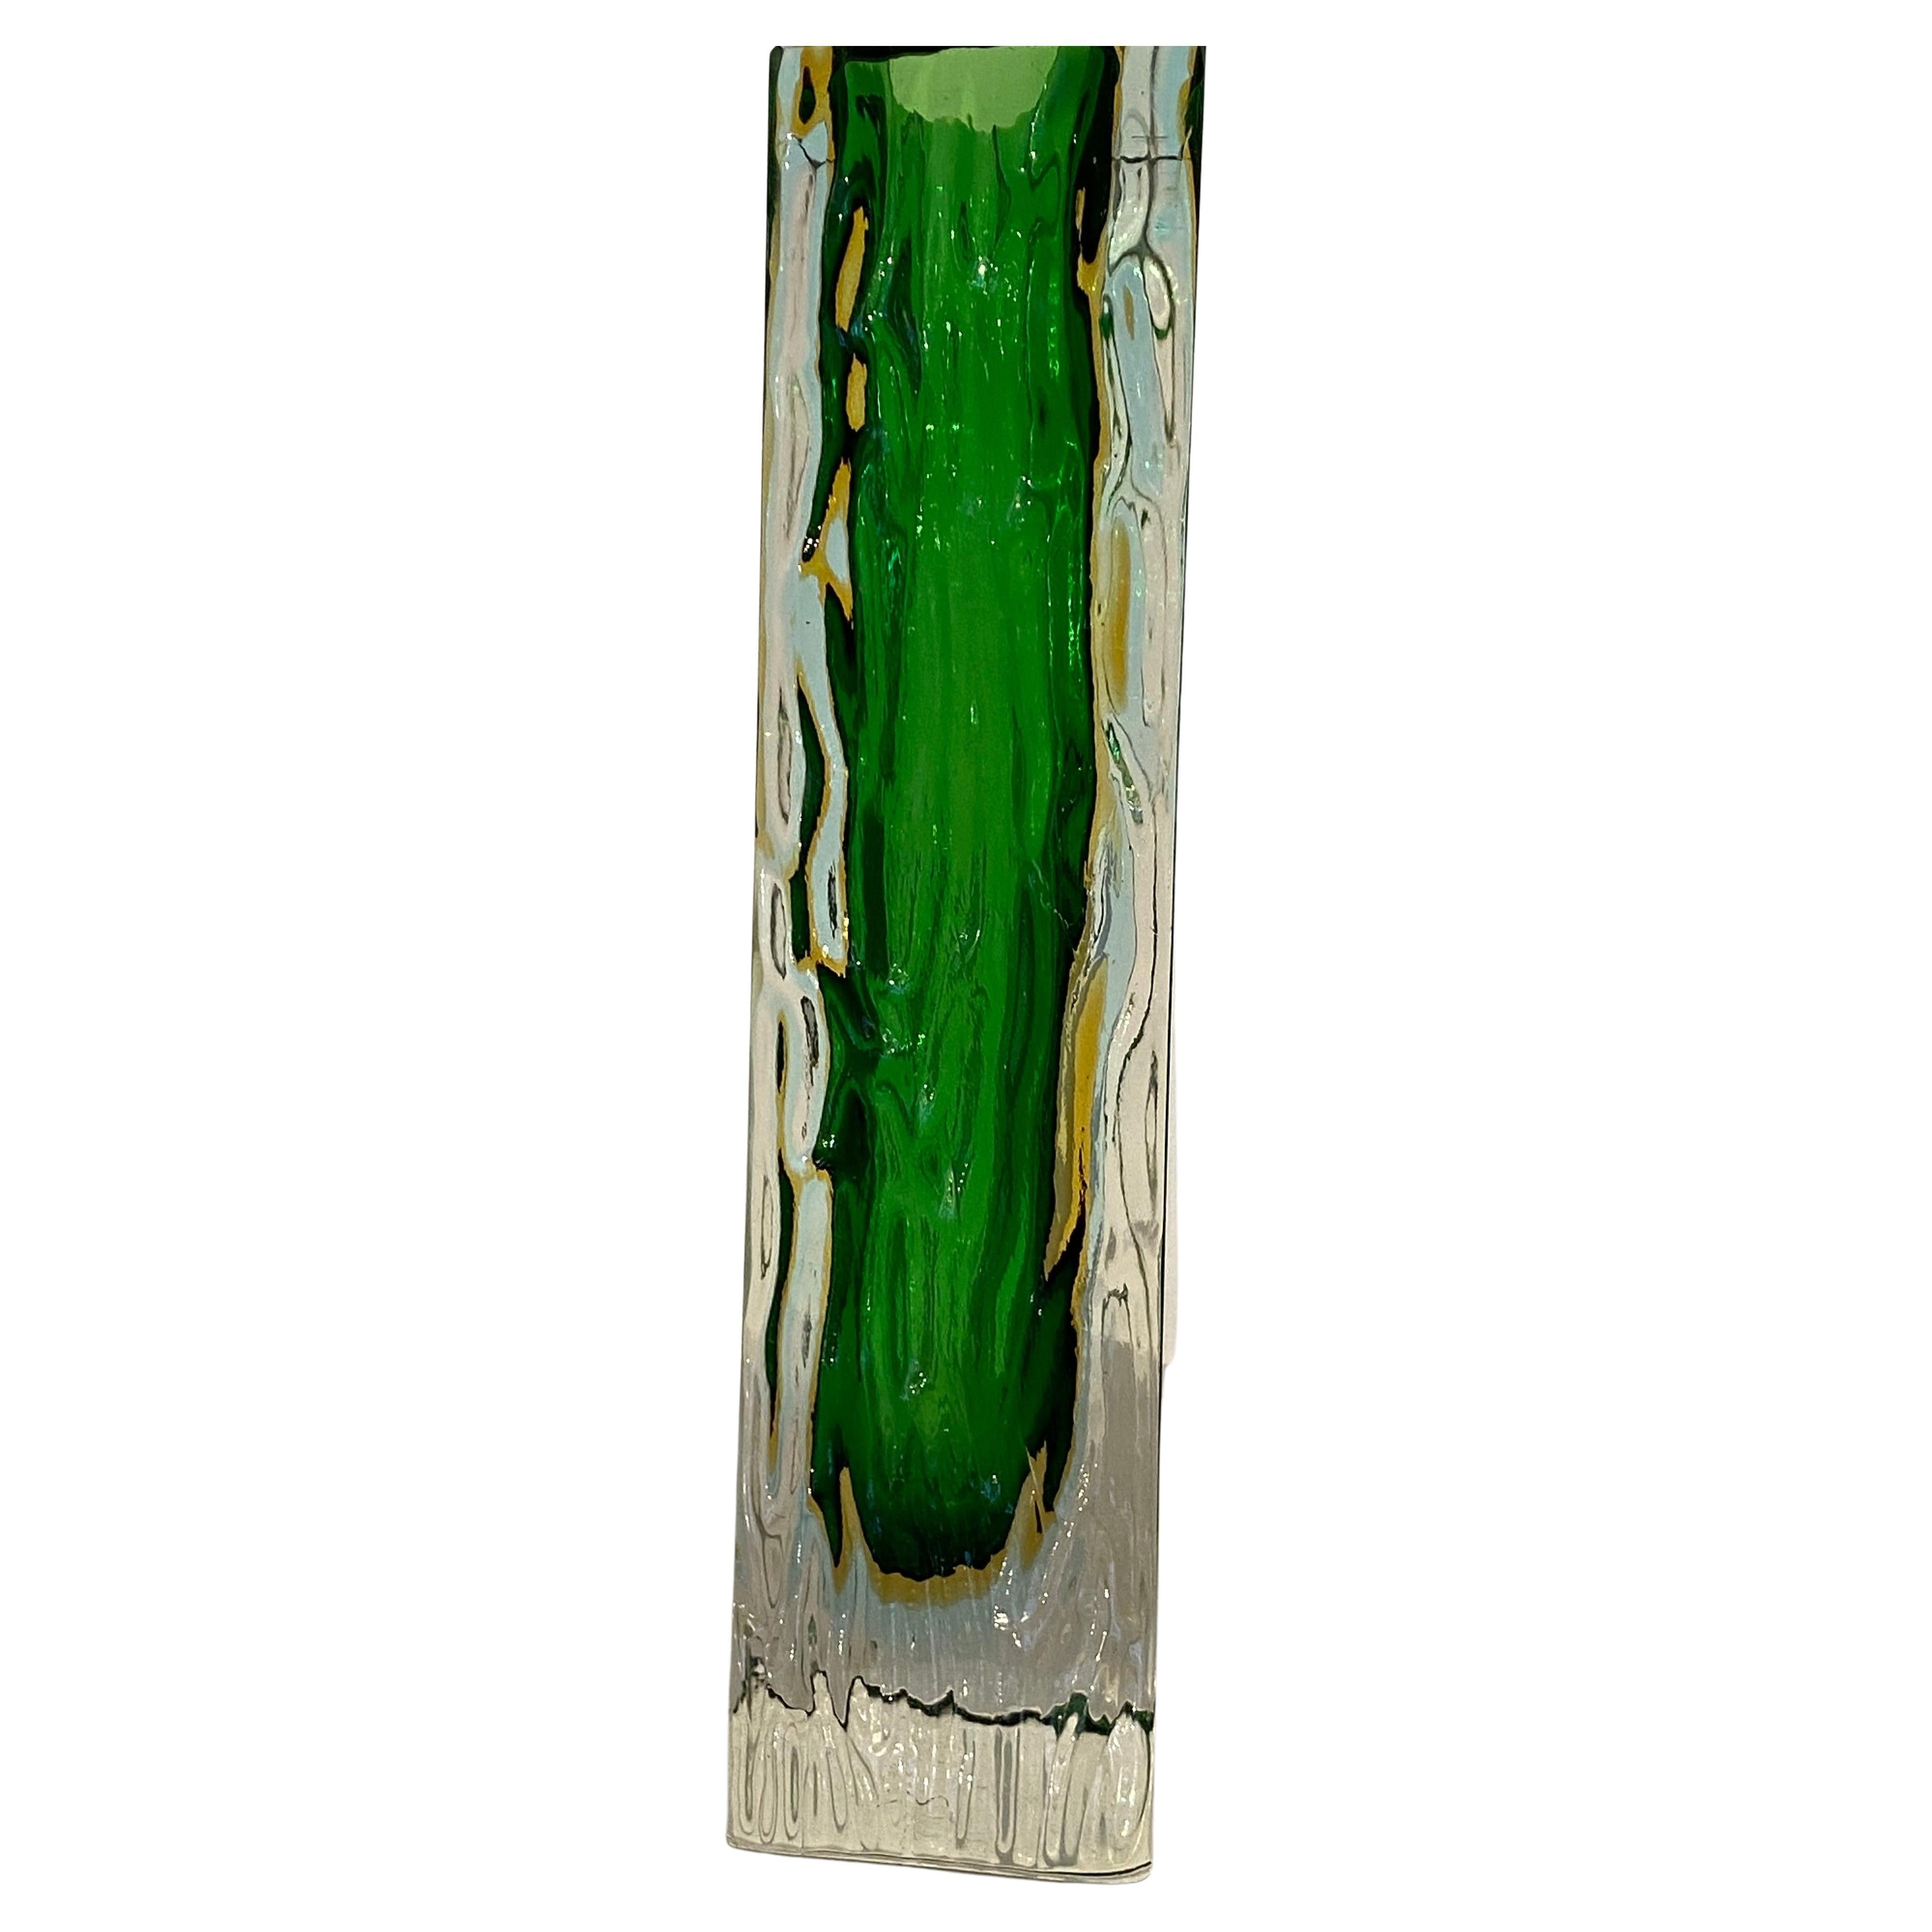 Beautifully elegant designed by Allesandro Mandurzatto and made in Murano Italy a table vase designed of artistically shaped textured sides and faceted edges, the contrasting colors of green and yellow are fused into the clear glass shape using the